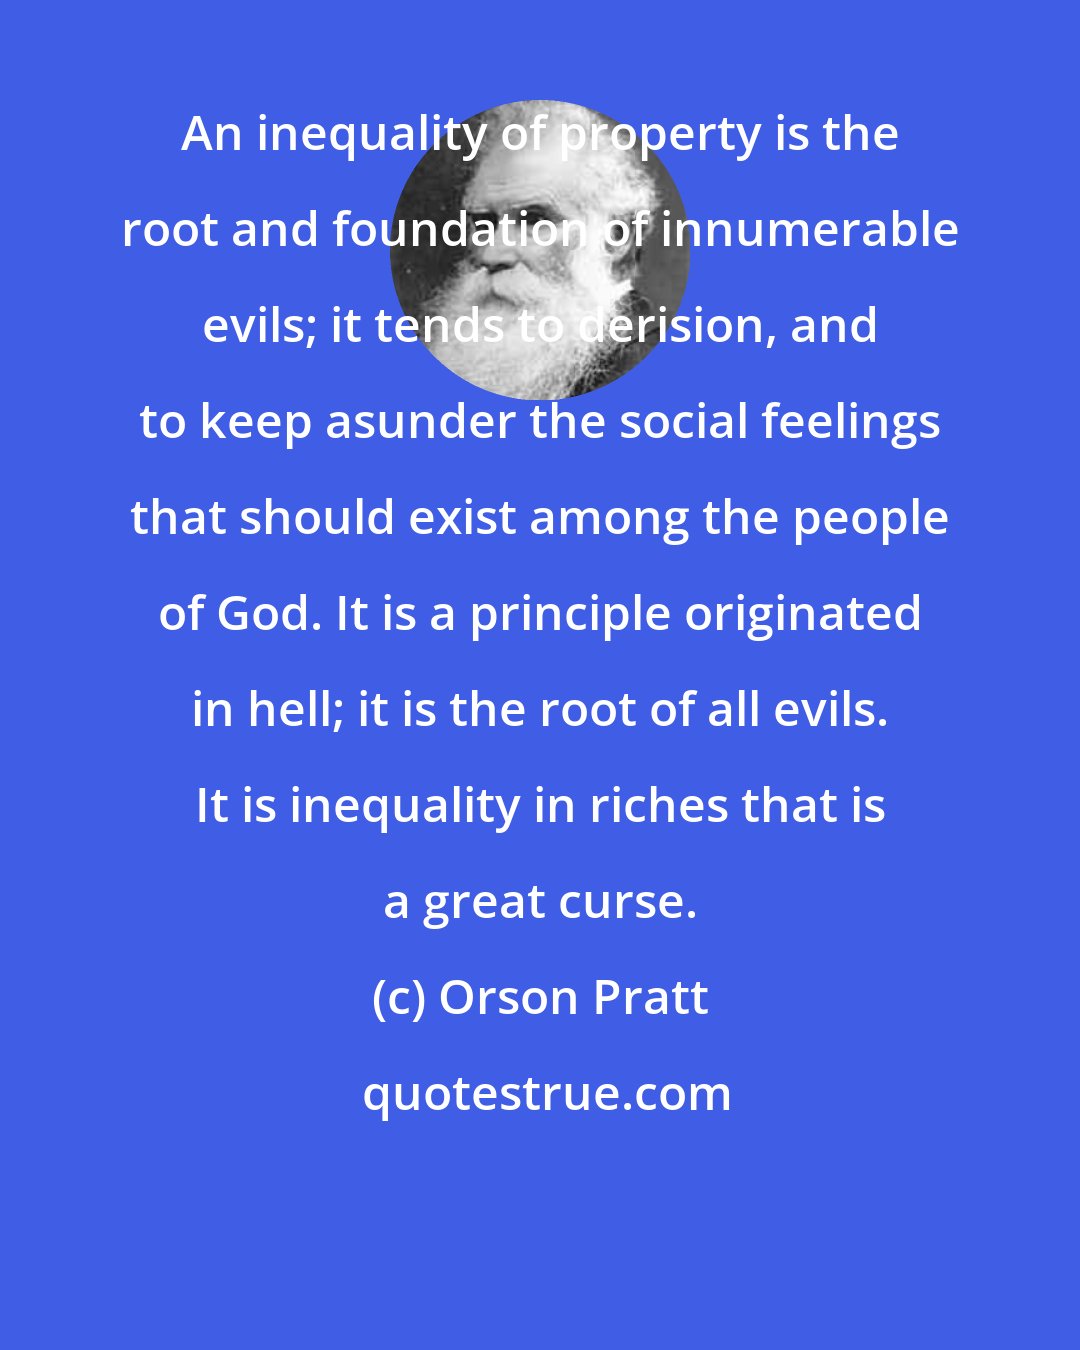 Orson Pratt: An inequality of property is the root and foundation of innumerable evils; it tends to derision, and to keep asunder the social feelings that should exist among the people of God. It is a principle originated in hell; it is the root of all evils. It is inequality in riches that is a great curse.